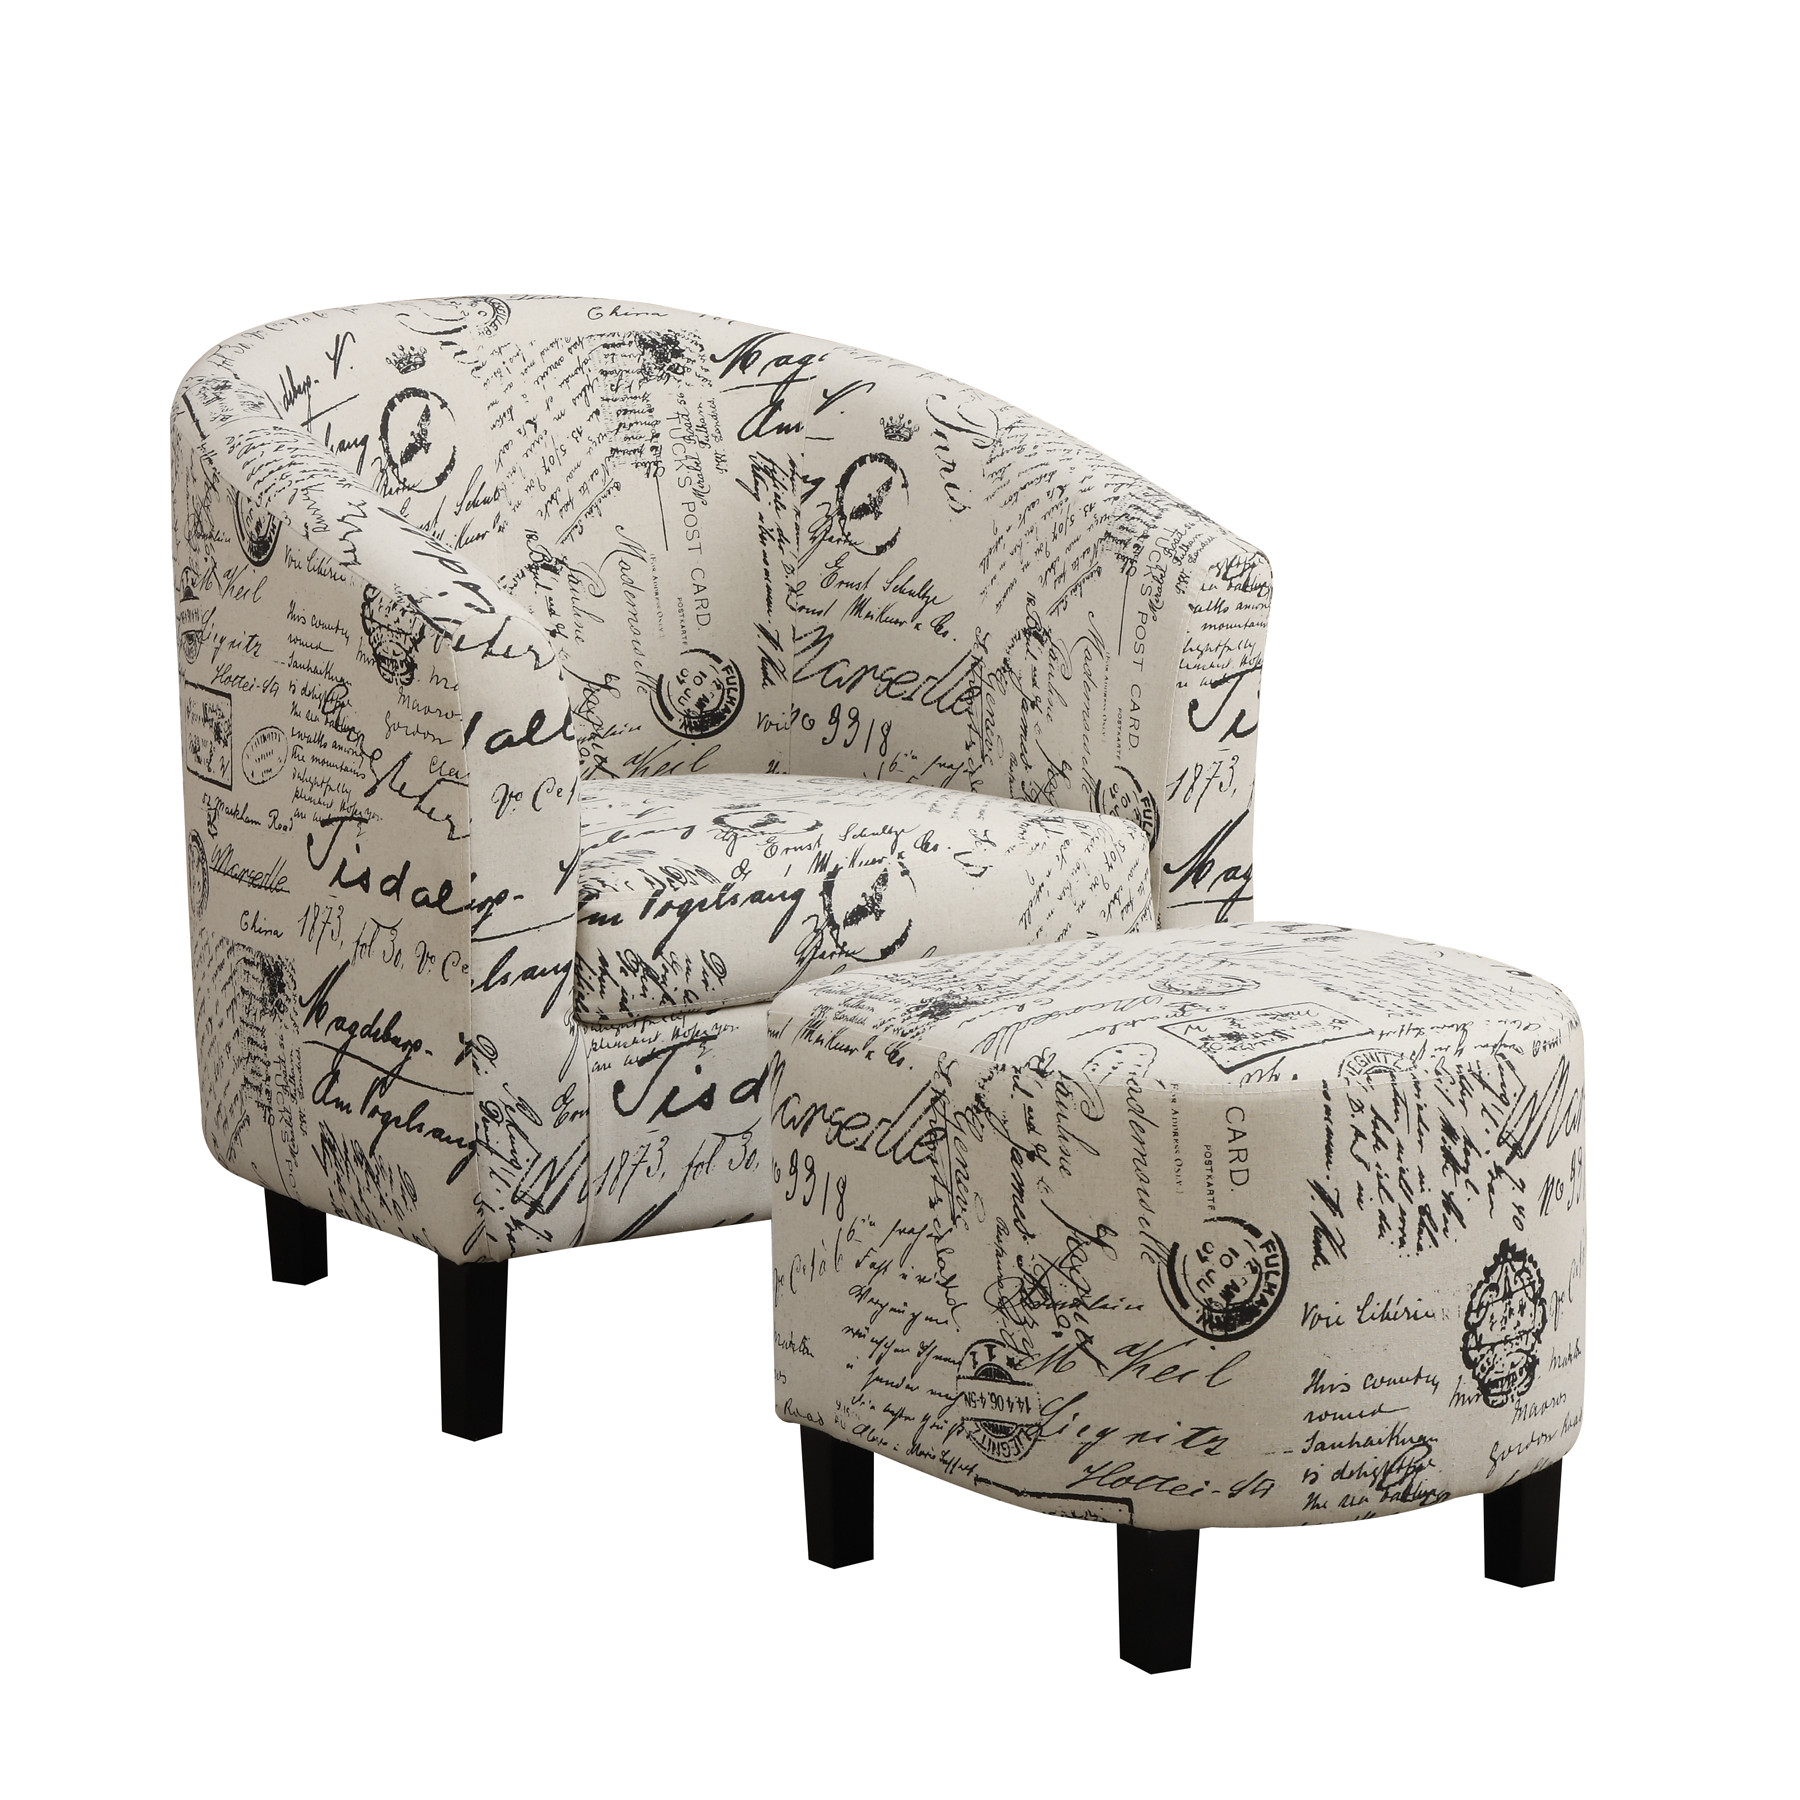 Awesome Printed Chairs 18 In with Printed Chairs